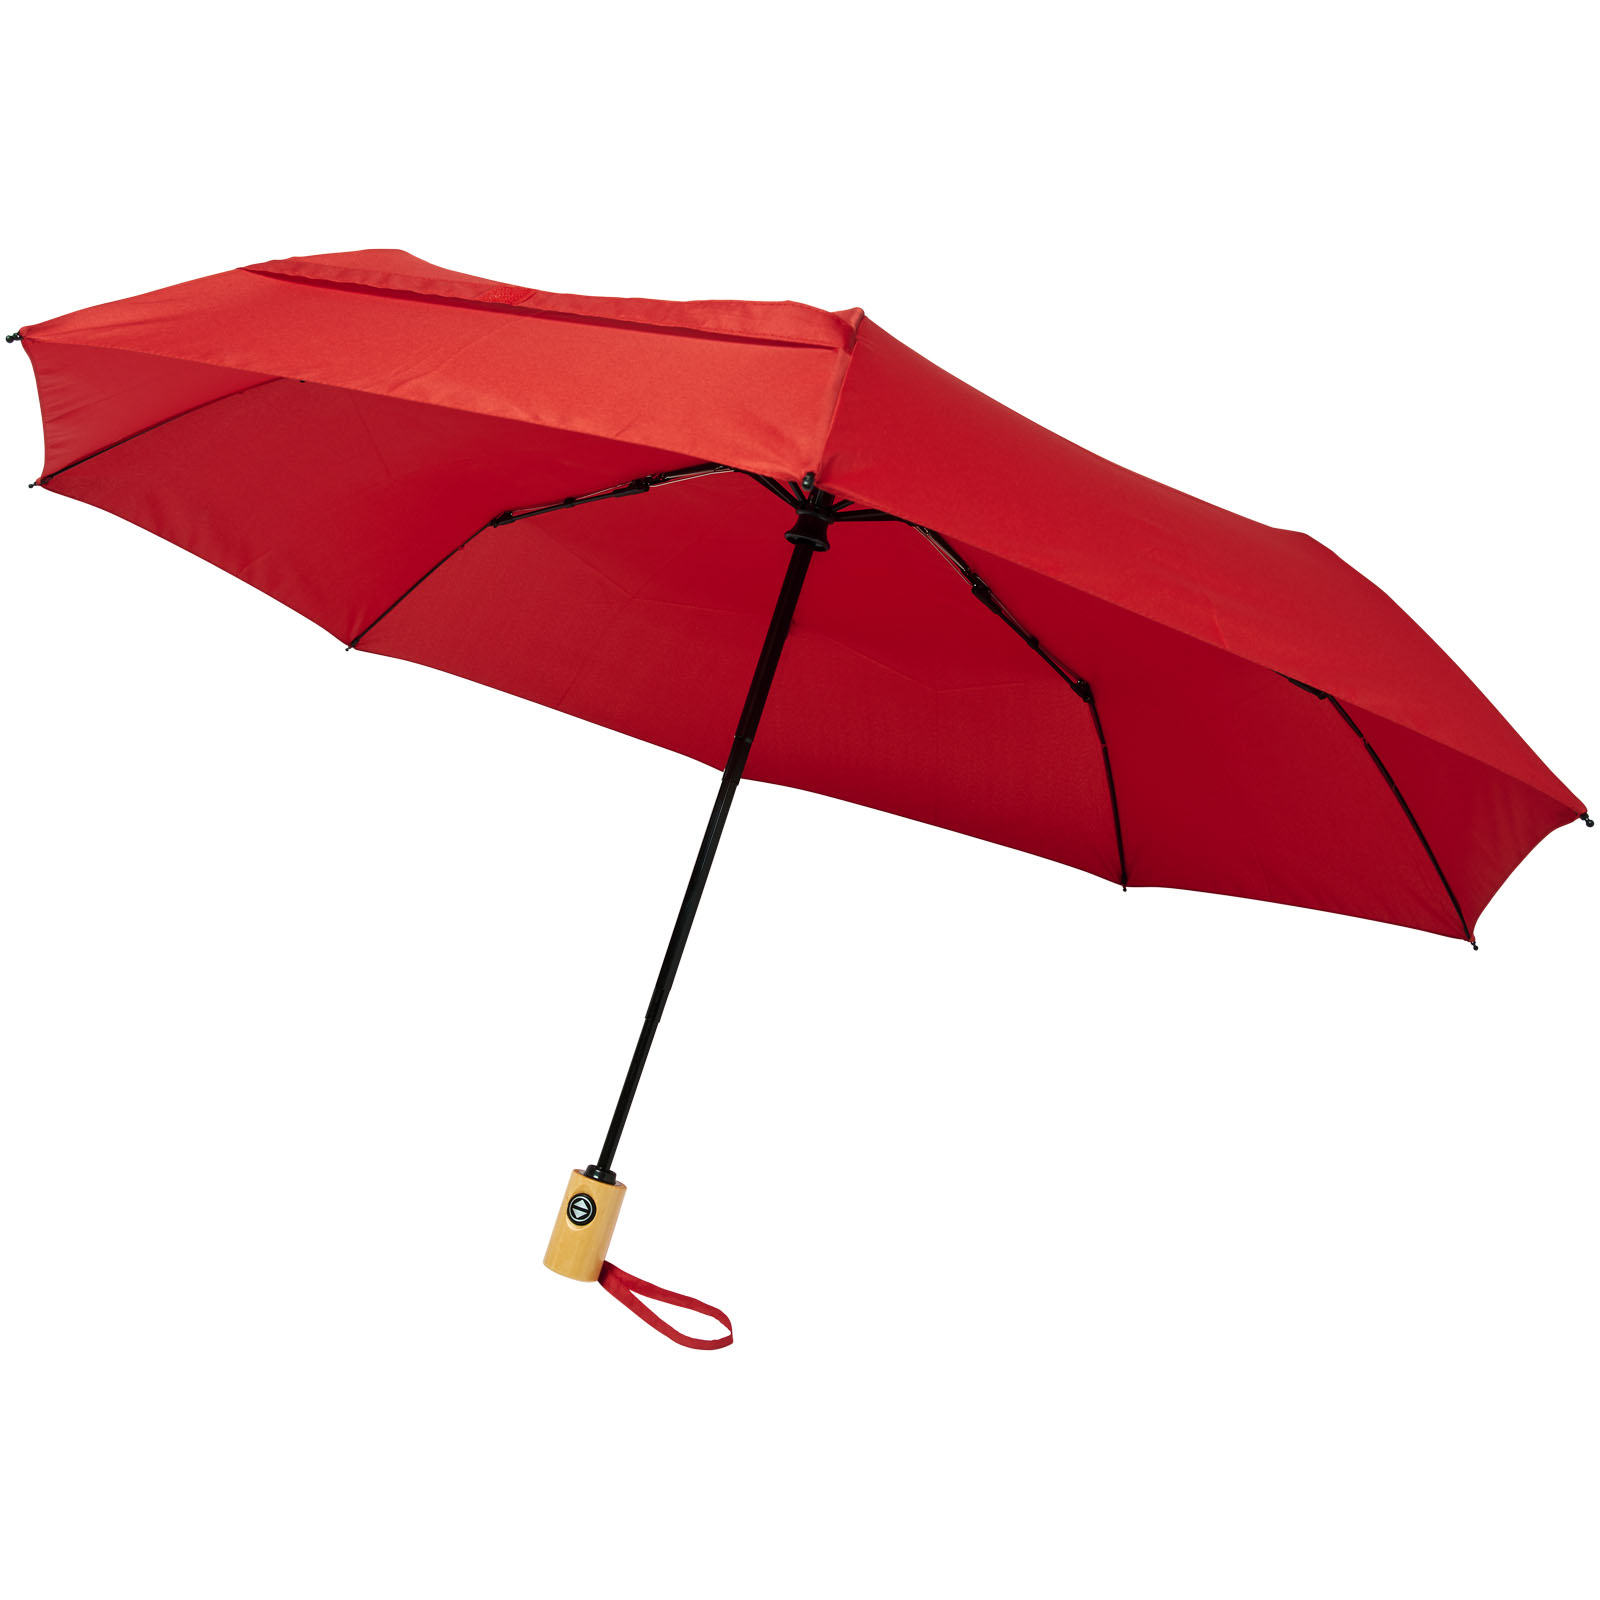 Recycled folding umbrella SOFTY with automatic opening and closing, 21"